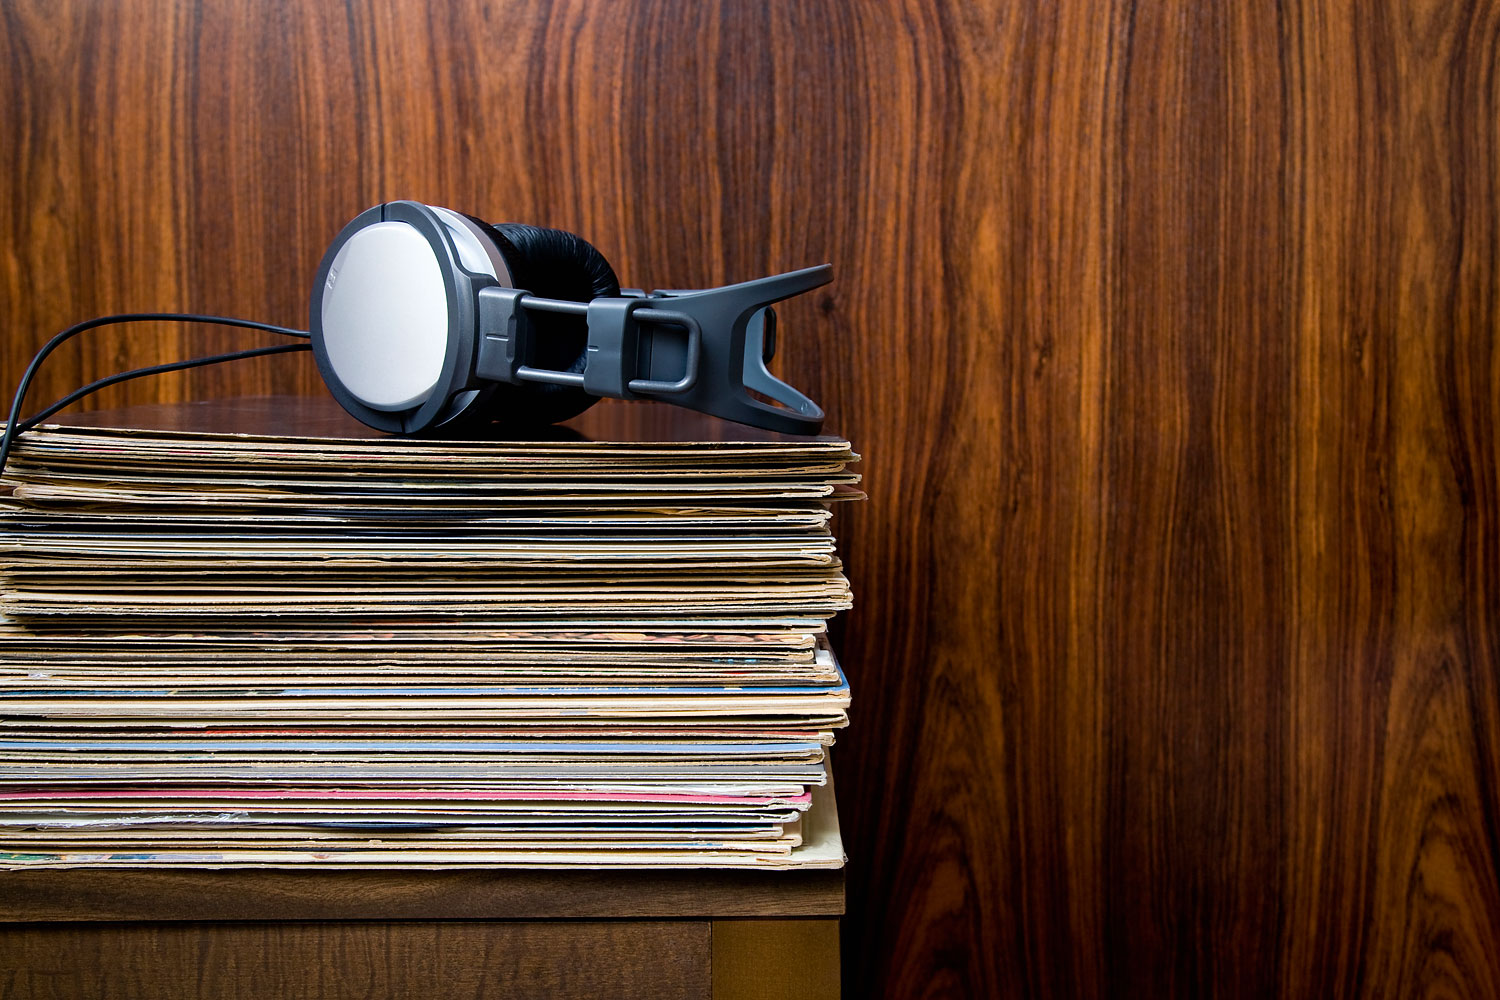 Headphones laying on stack of vinyl records